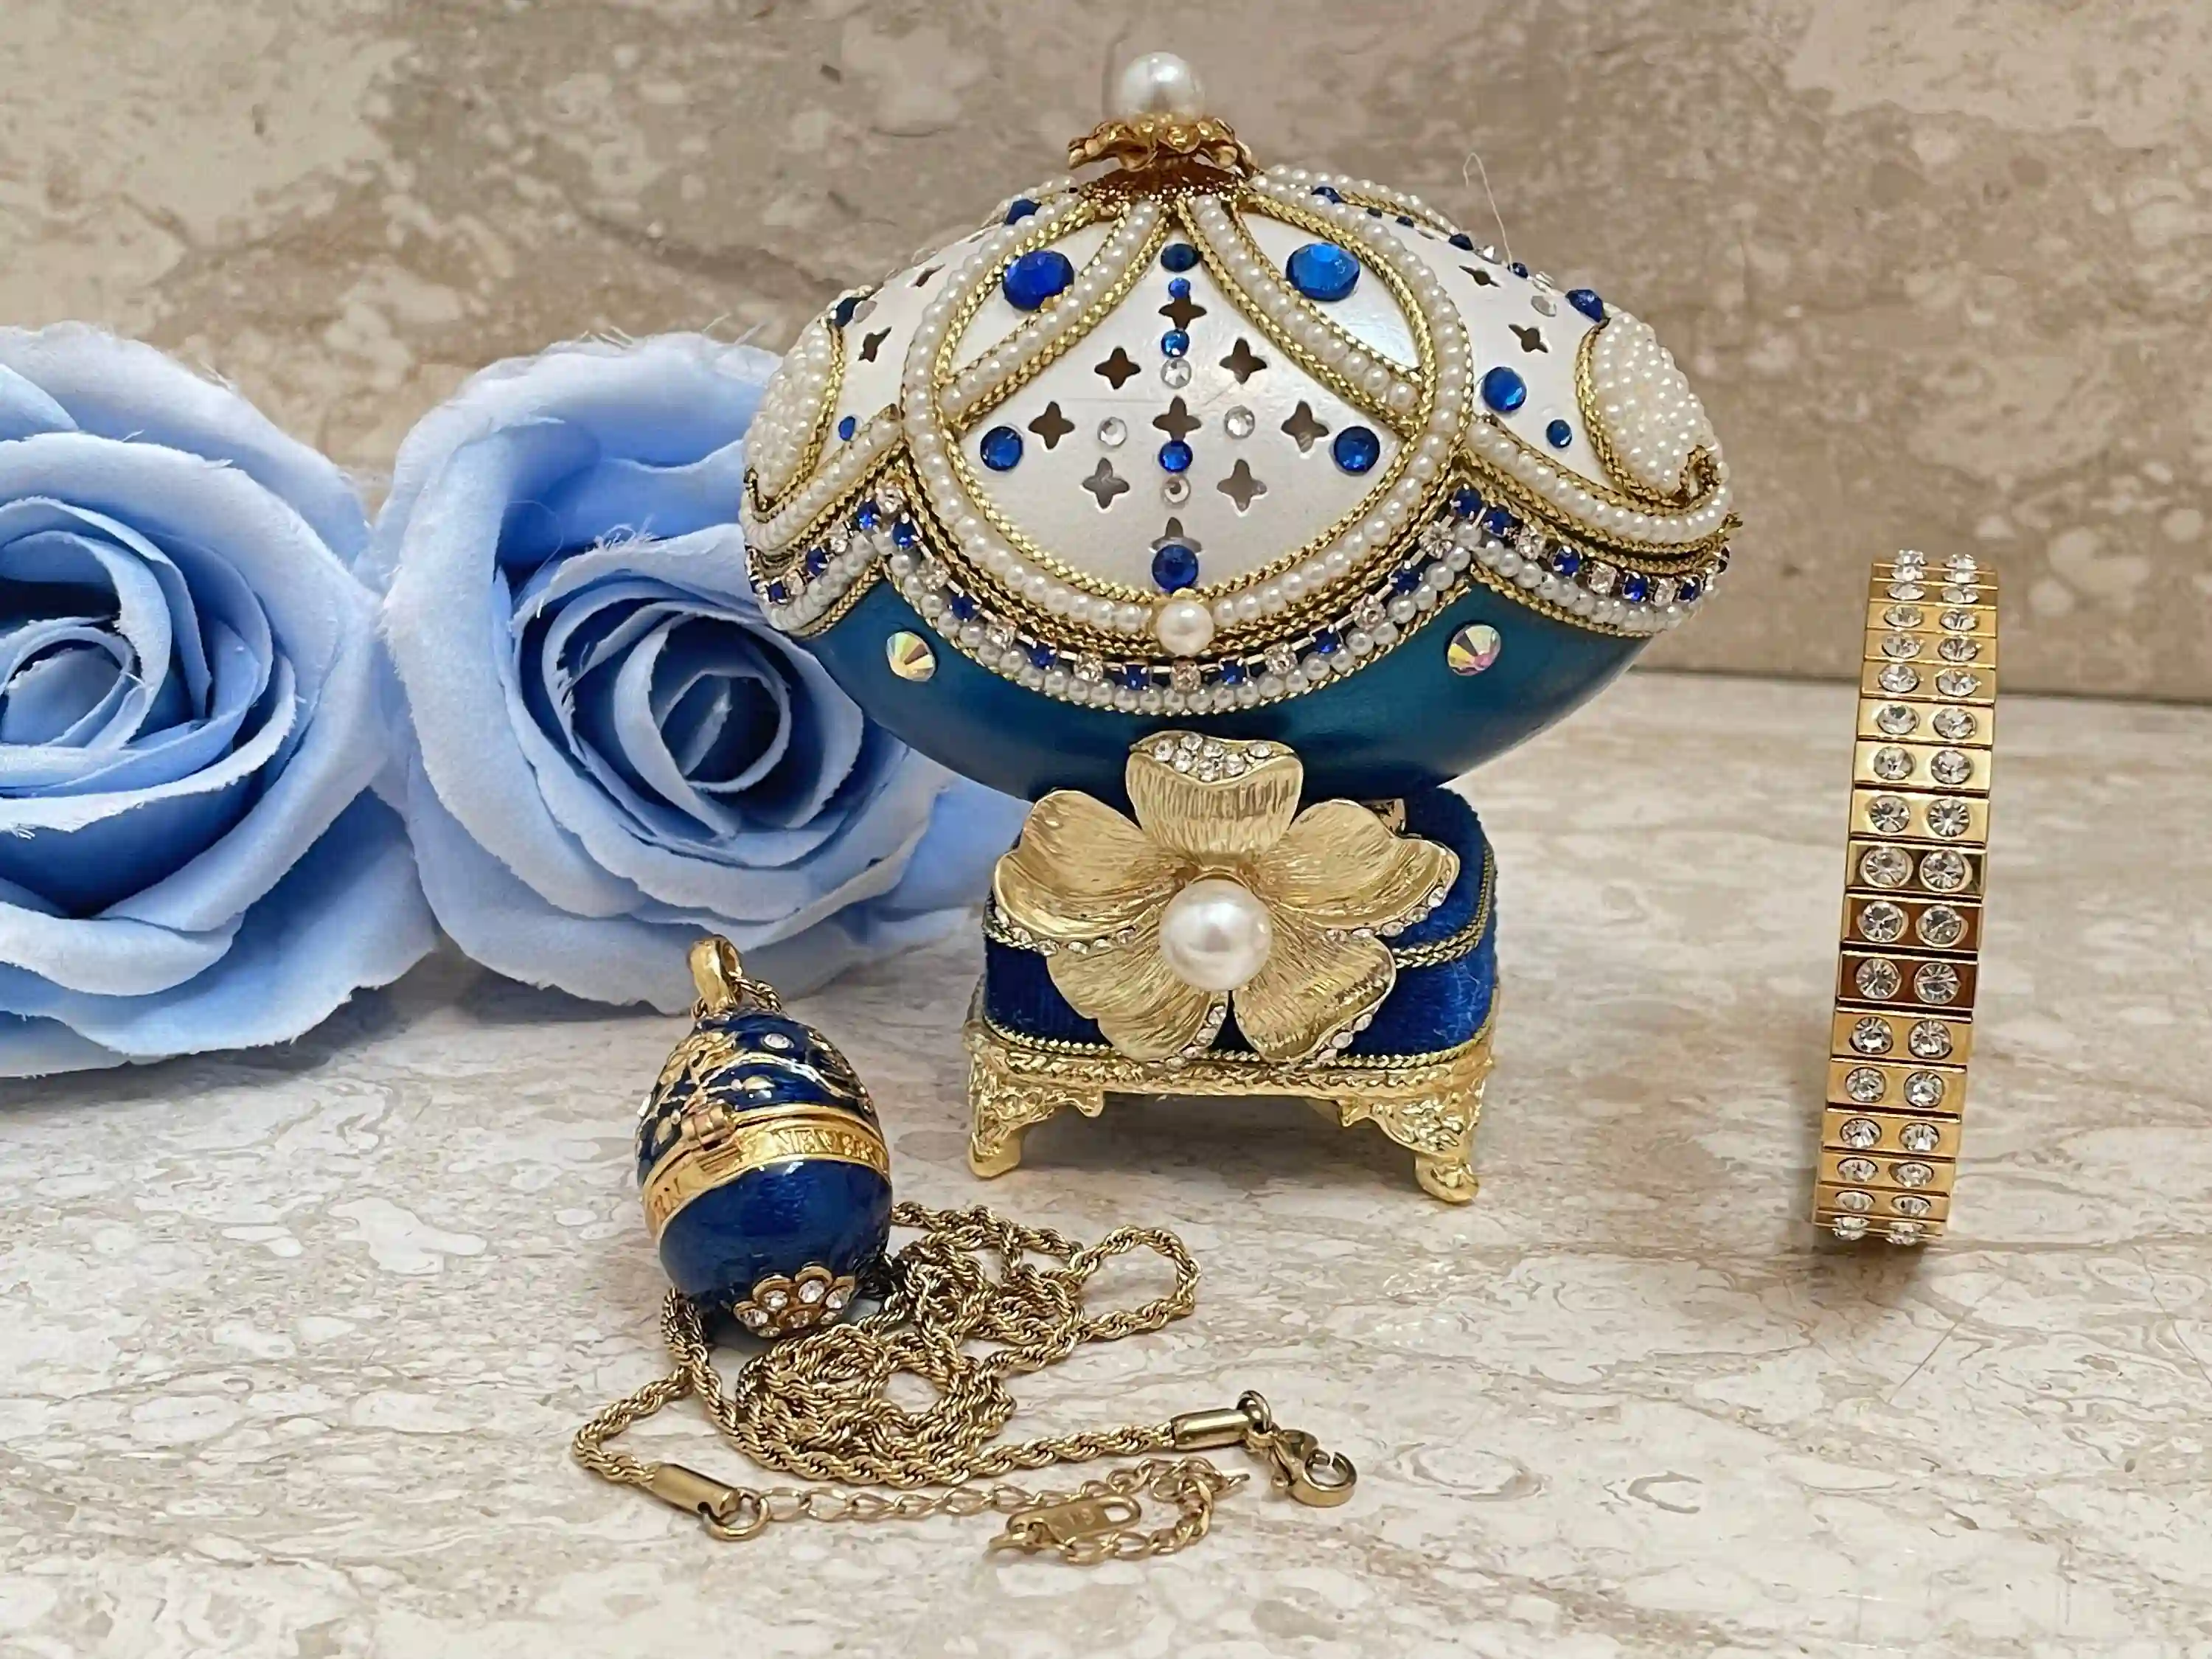 1993 Vintage Faberge Egg style Music Blue Faberge Egg Collectors Box Natural Hand Carved Egg Faberge Egg Sapphire 24k GOLD gift for Birthday 